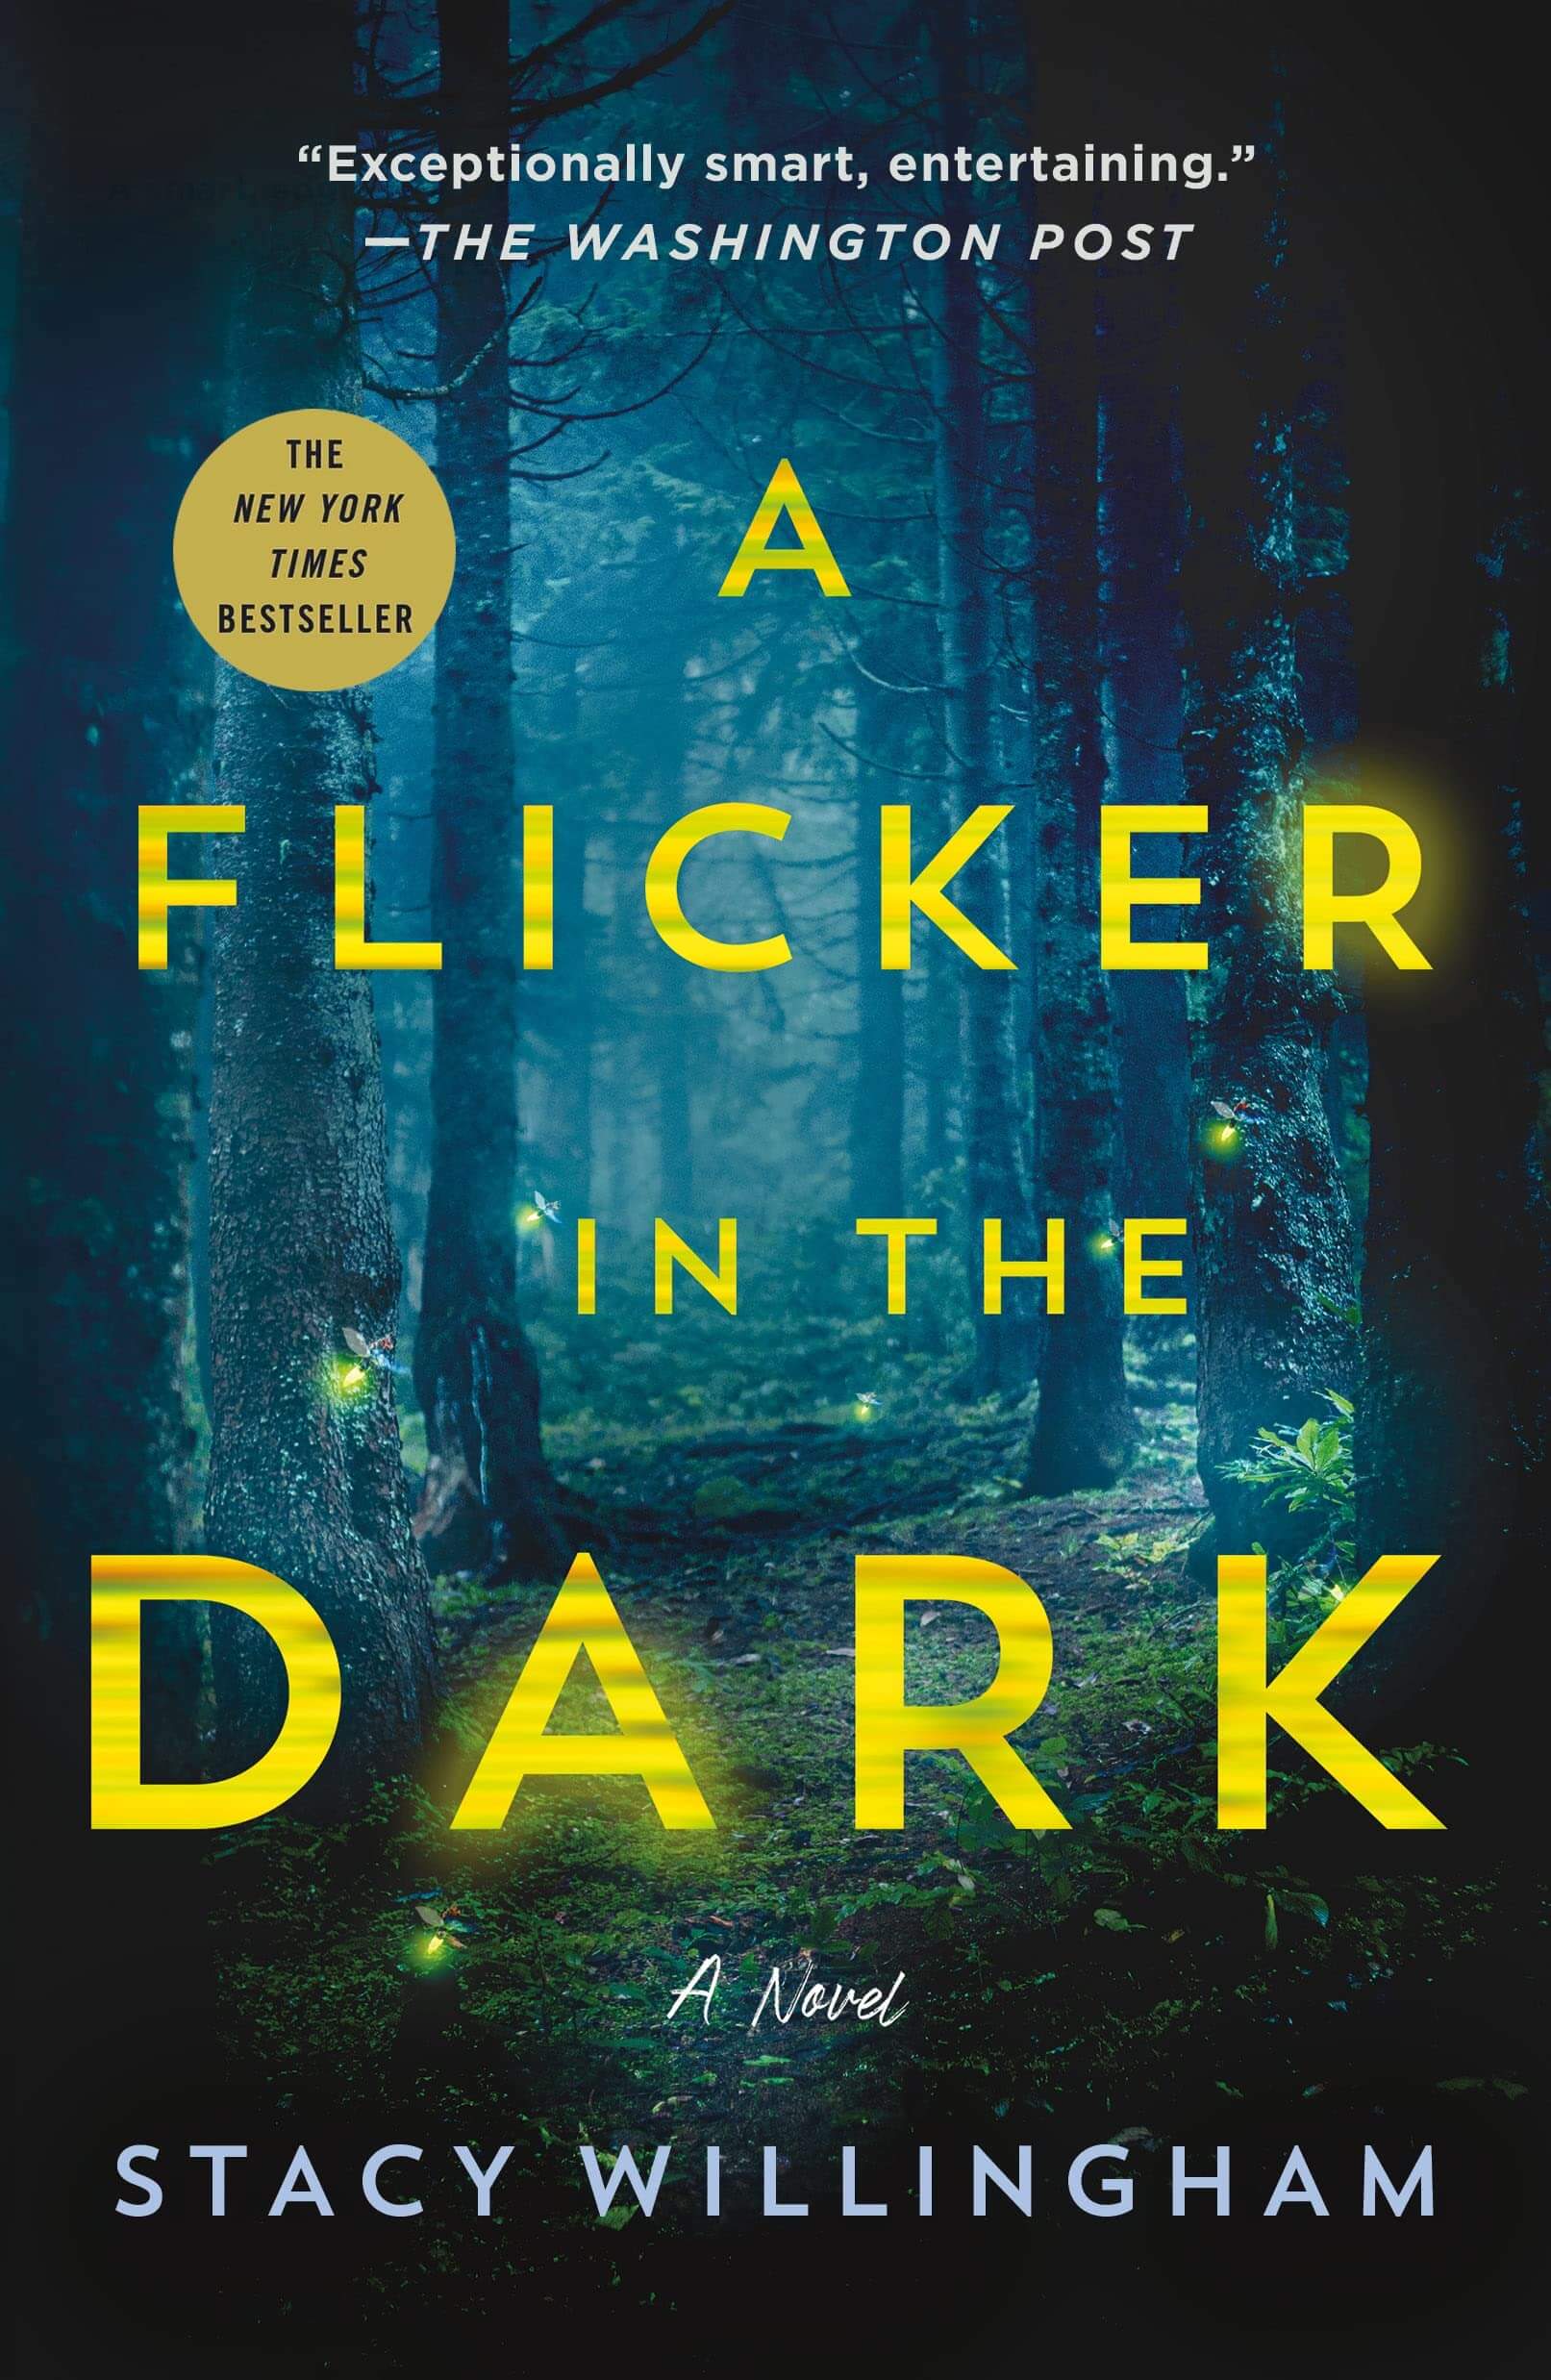 Cover of A Flicker in the Dark by Stacy Willingham